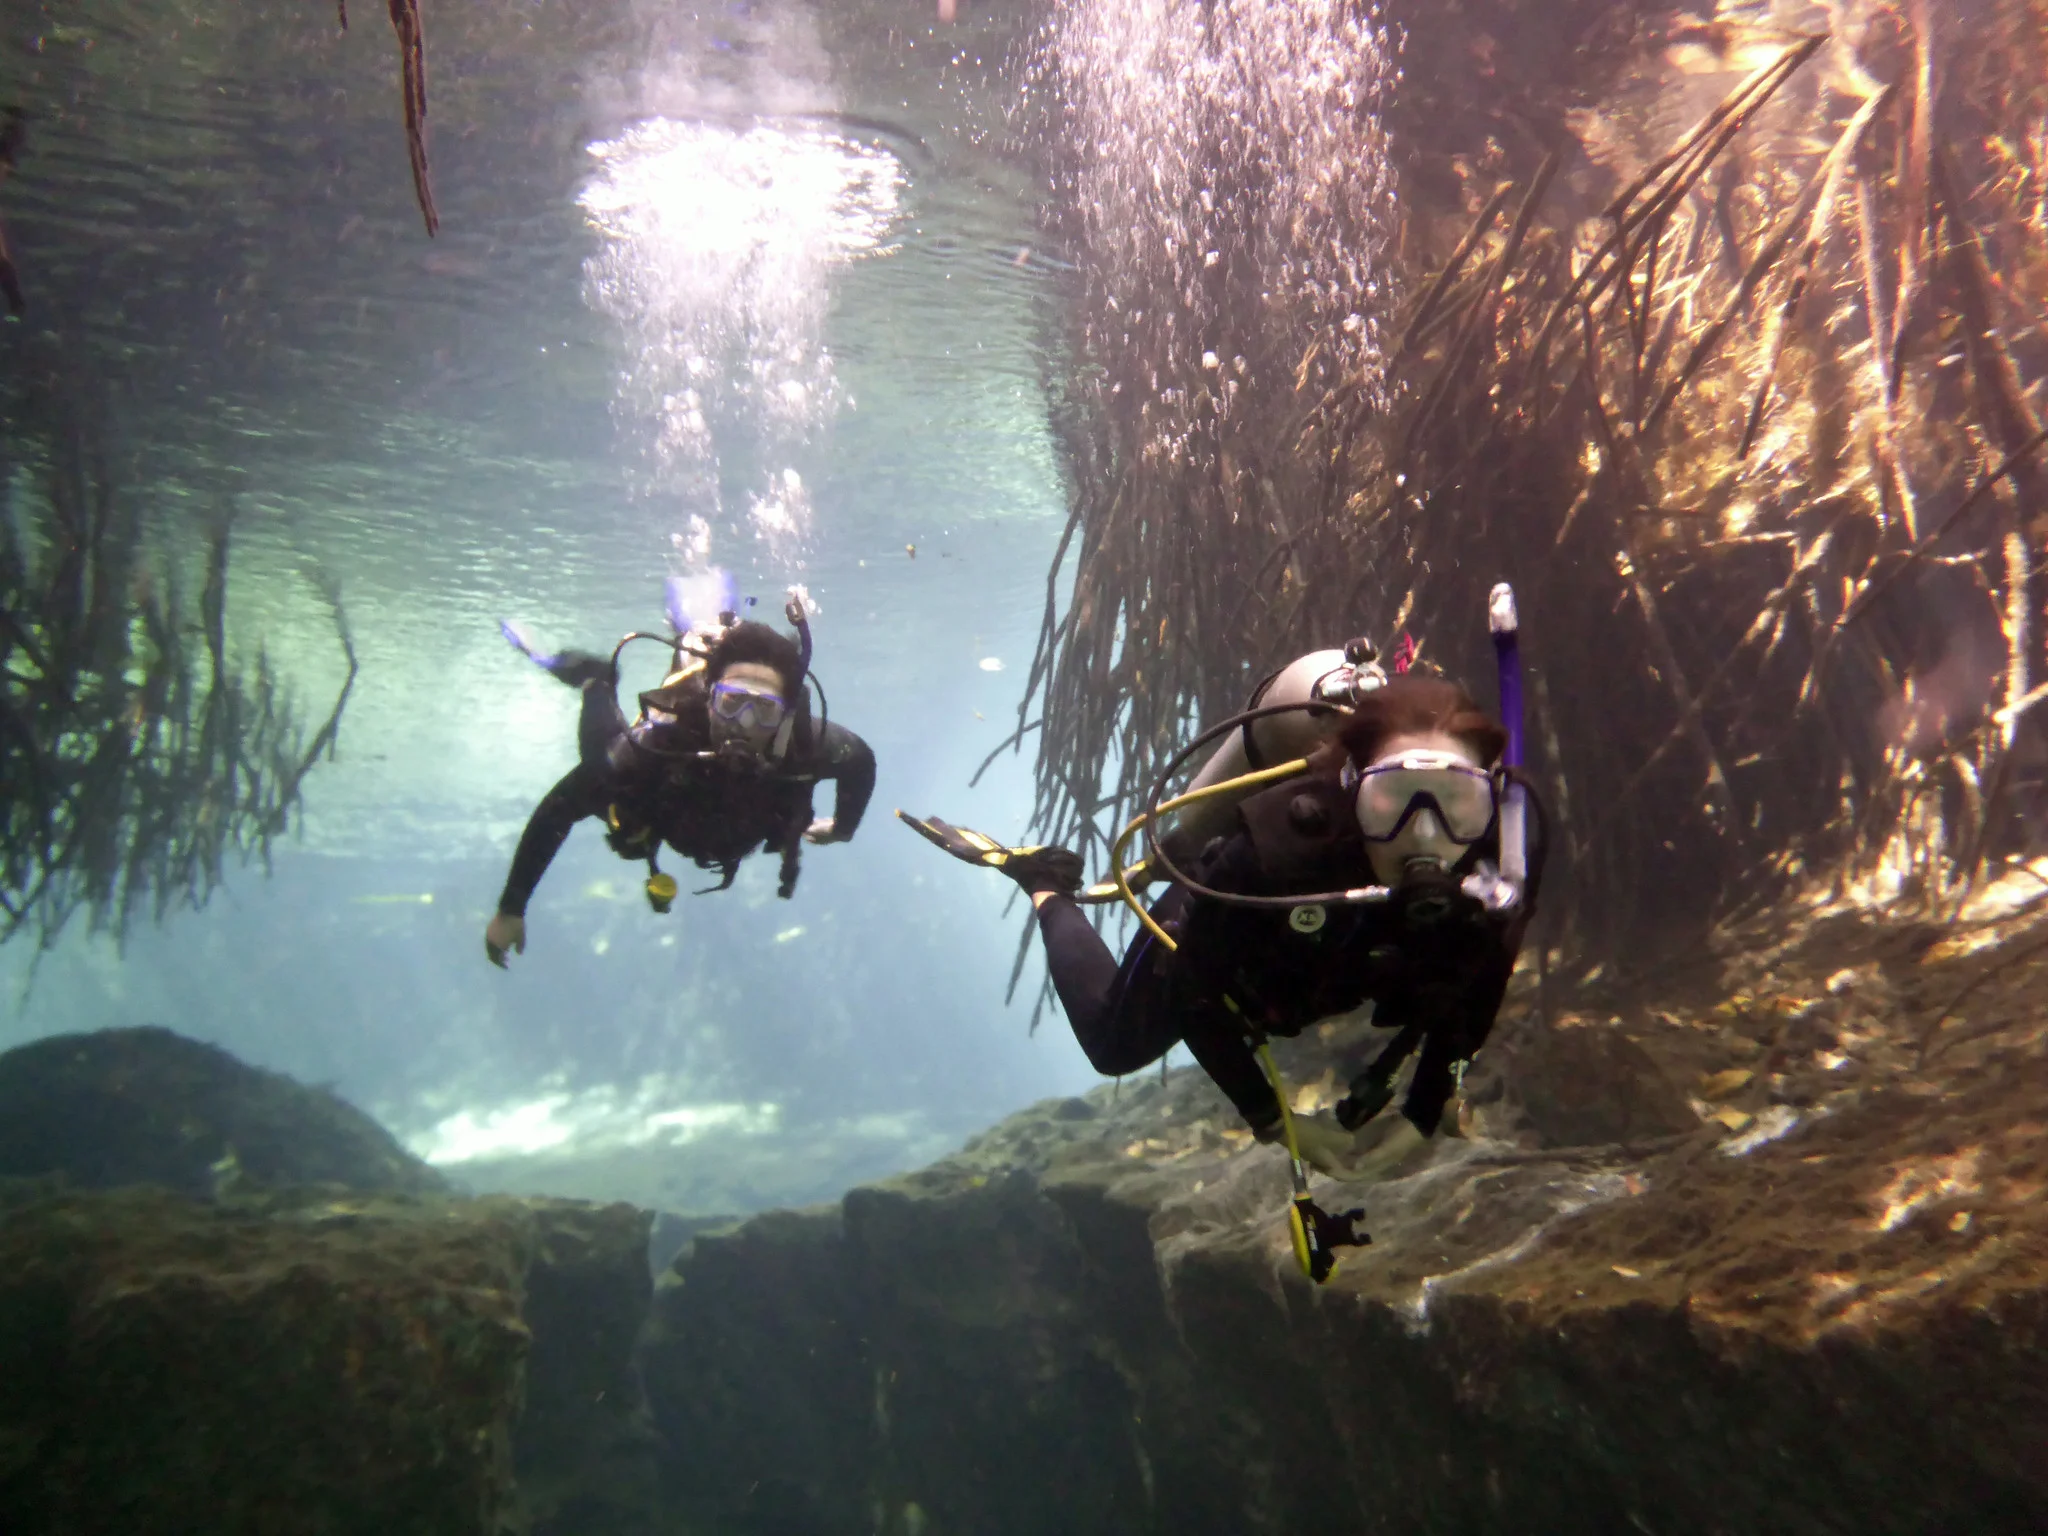 "Cenote dive - Photo by Steve Renaker at Flickr"